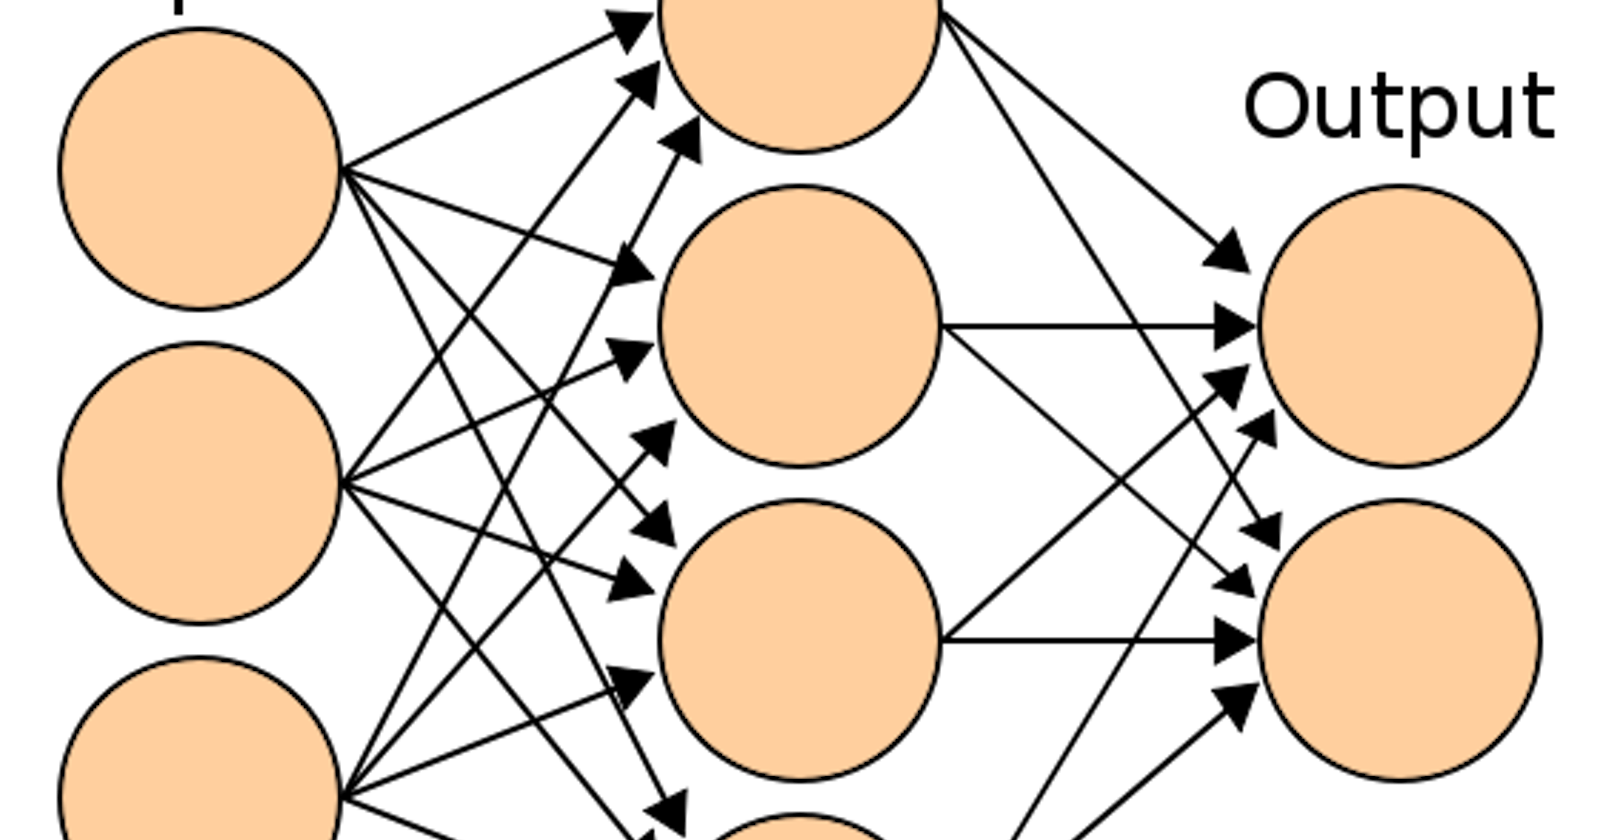 Neural Networks: Basic Theory in a Nutshell